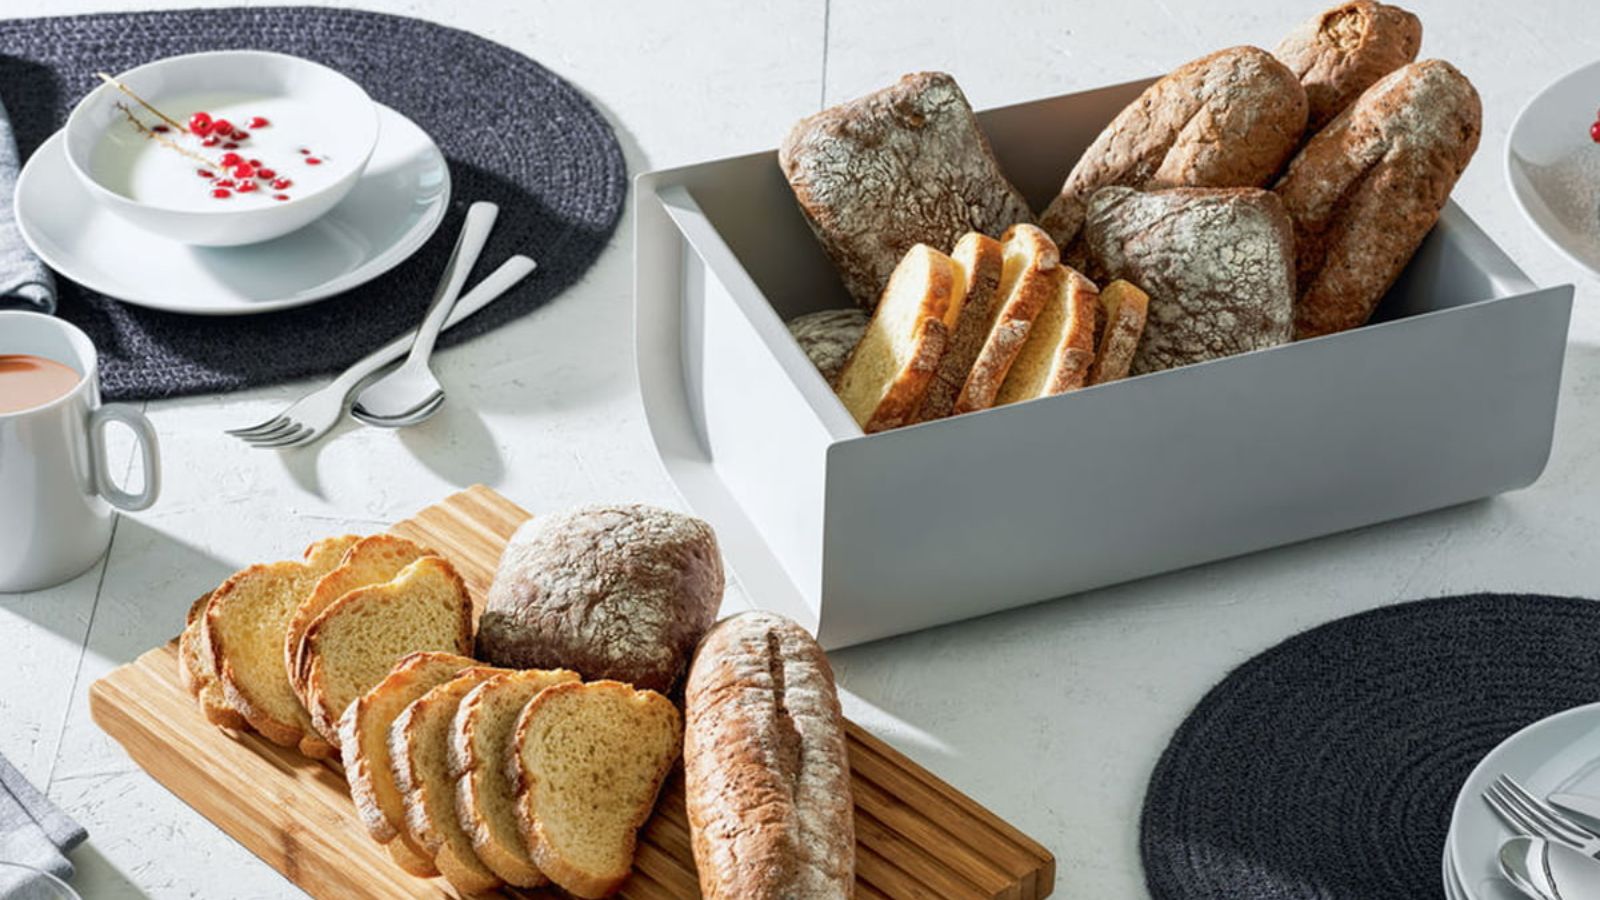 15 Best Bread Box Options for Fresher Bread in 2022 